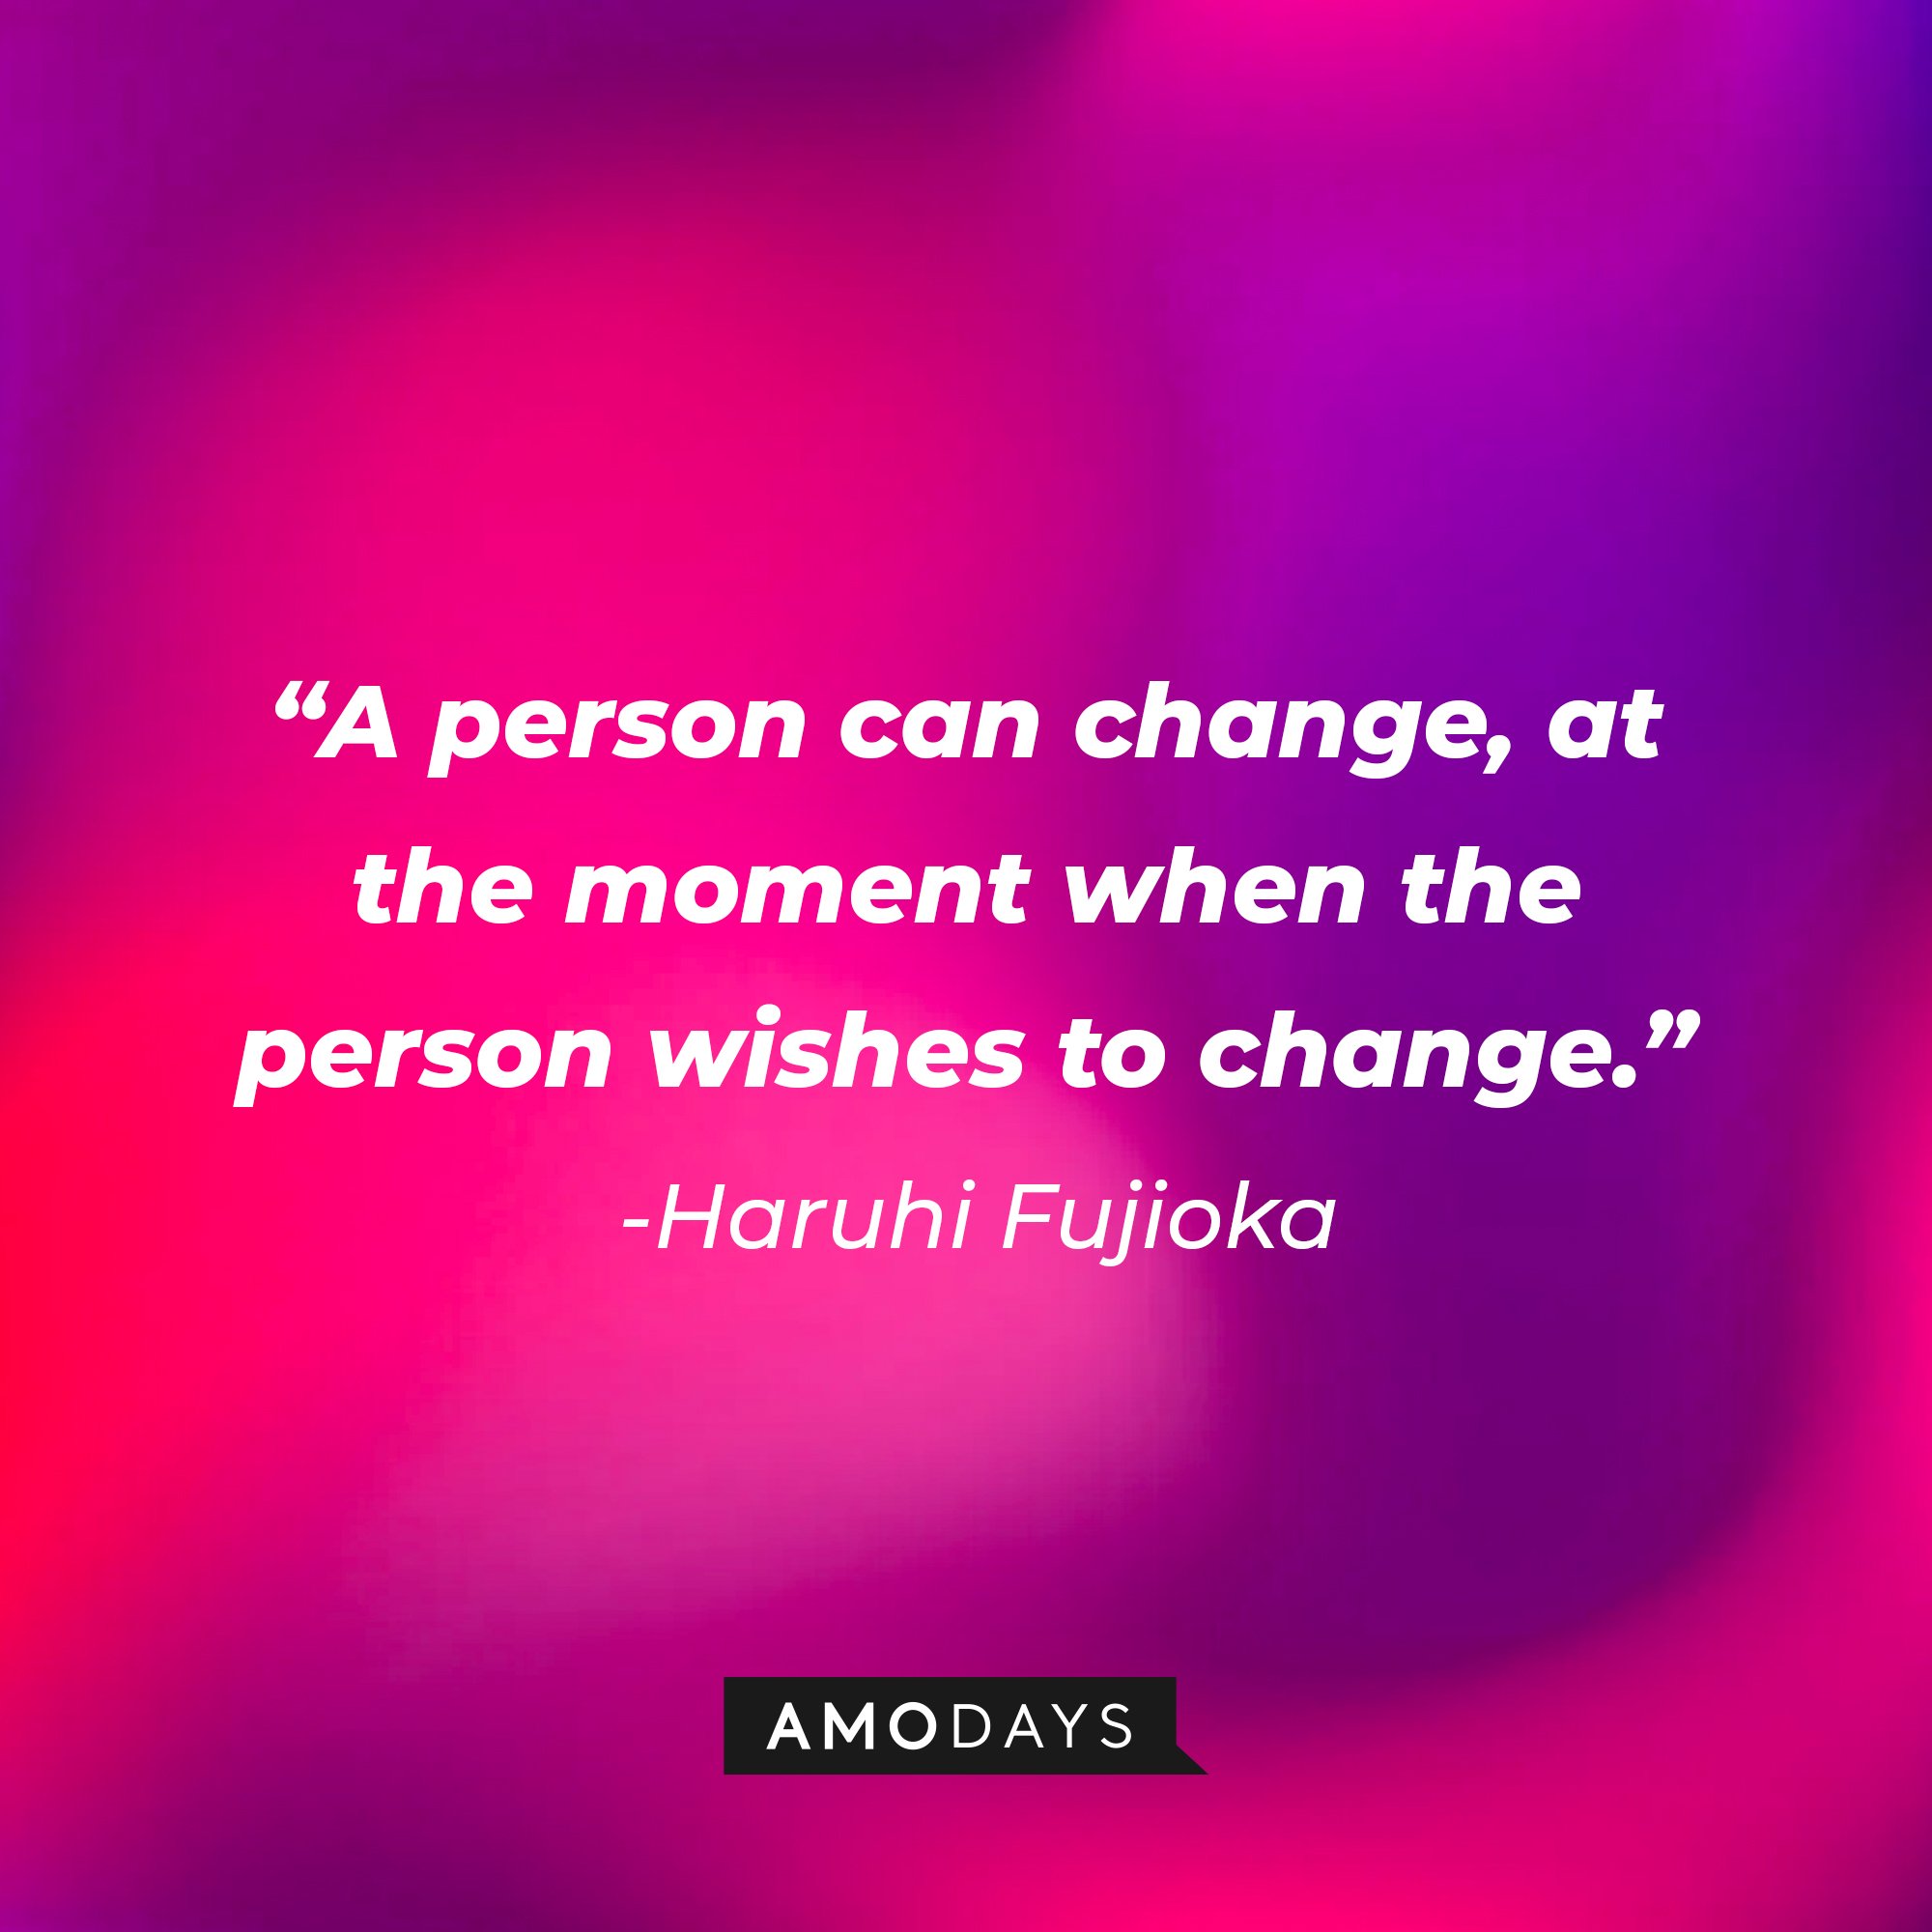 Haruhi Fujioka’s quote: "A person can change at the moment when the person wishes to change." |  Image: AmoDays